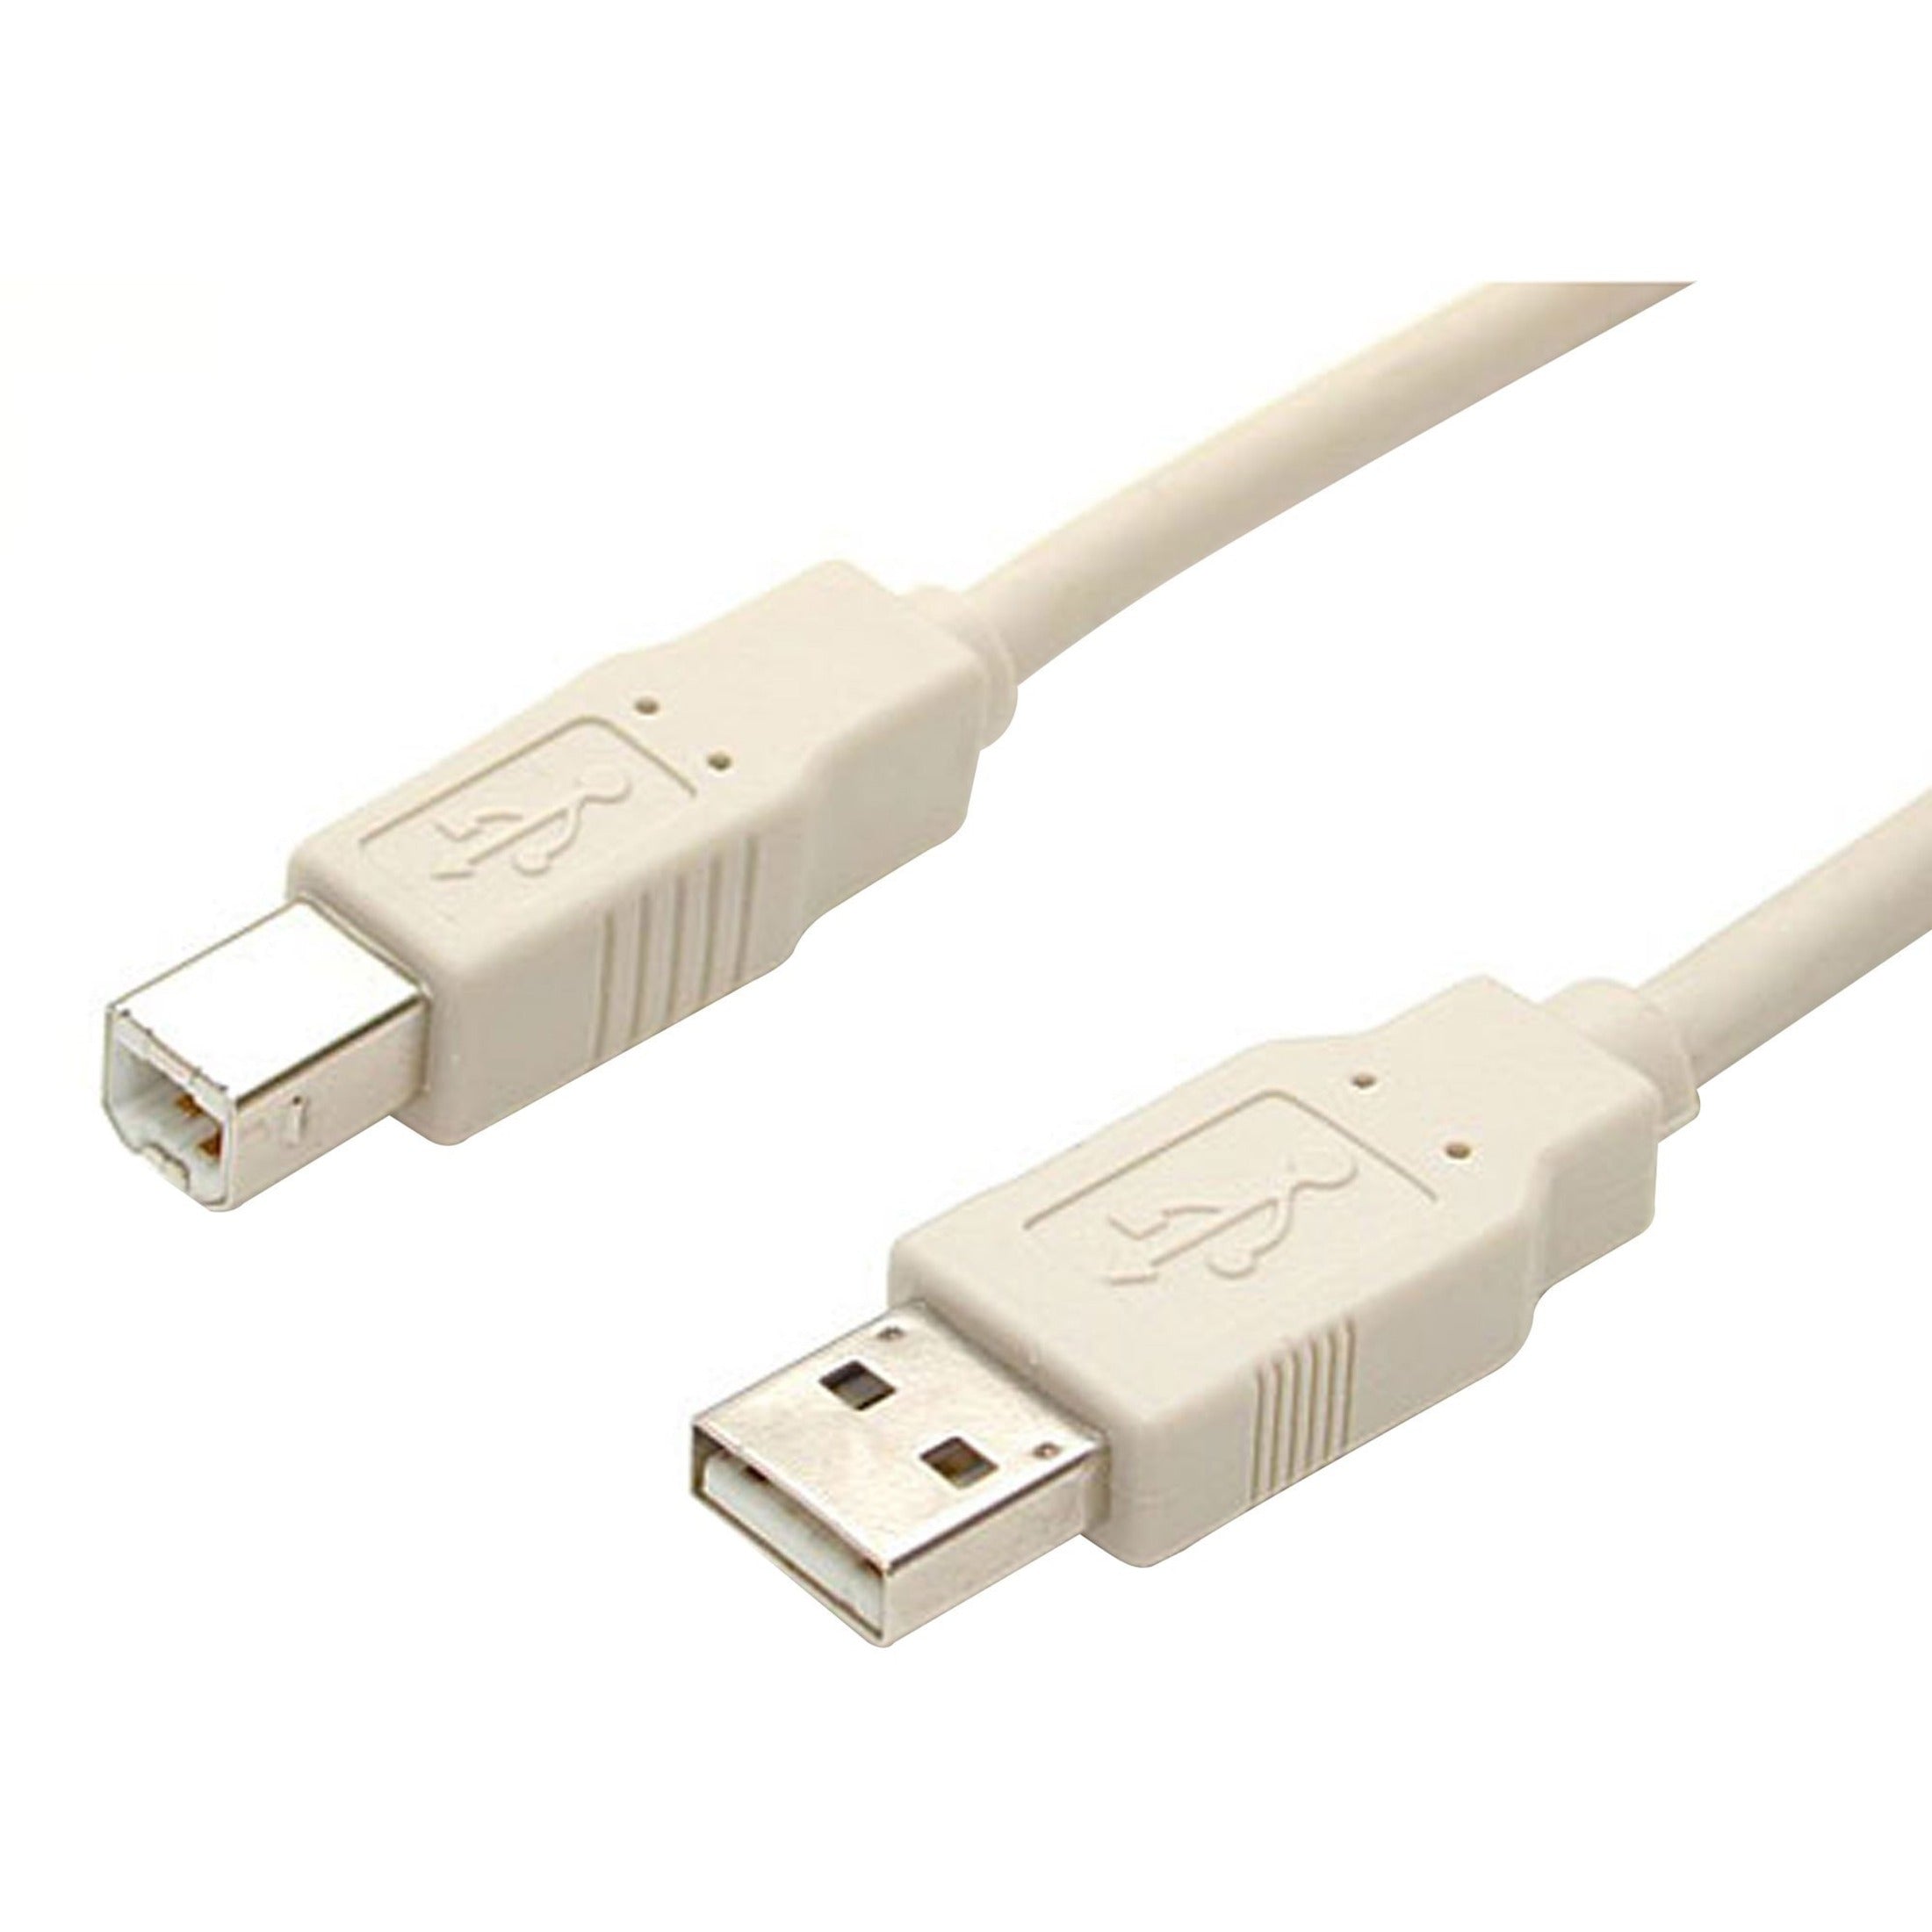 StarTech.com USBFAB_3 3 ft Beige A to B USB 2.0 Cable - M/M, Data Transfer Cable for PC, Printer, Scanner, Hard Drive